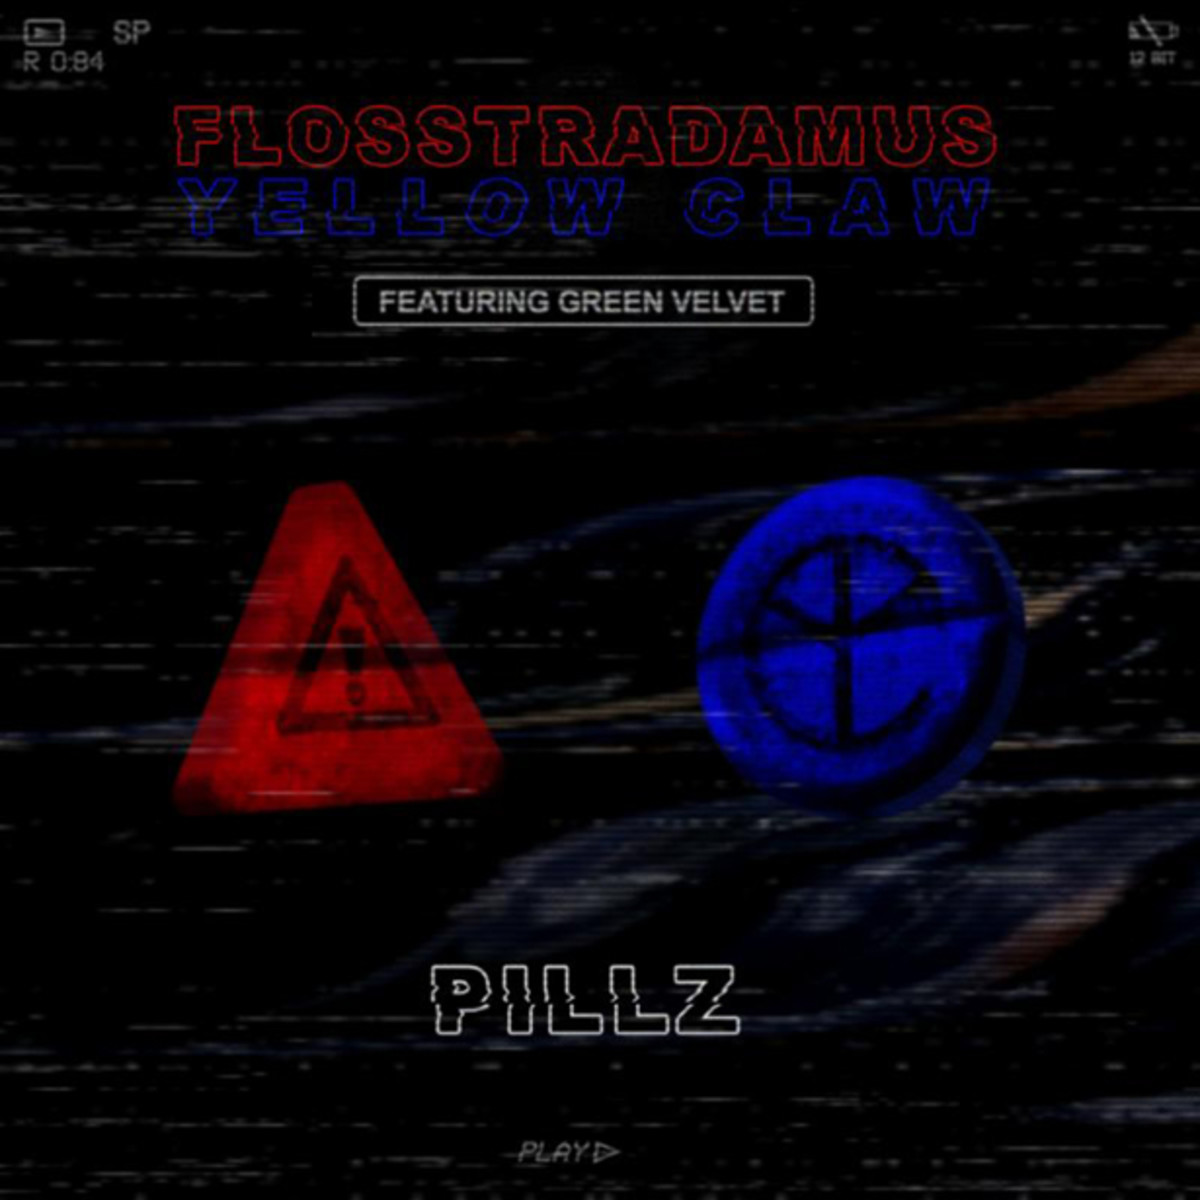 EDM News: Flosstradamus Signs To Ultra Music And Releases New Track Featuring Green Velvet